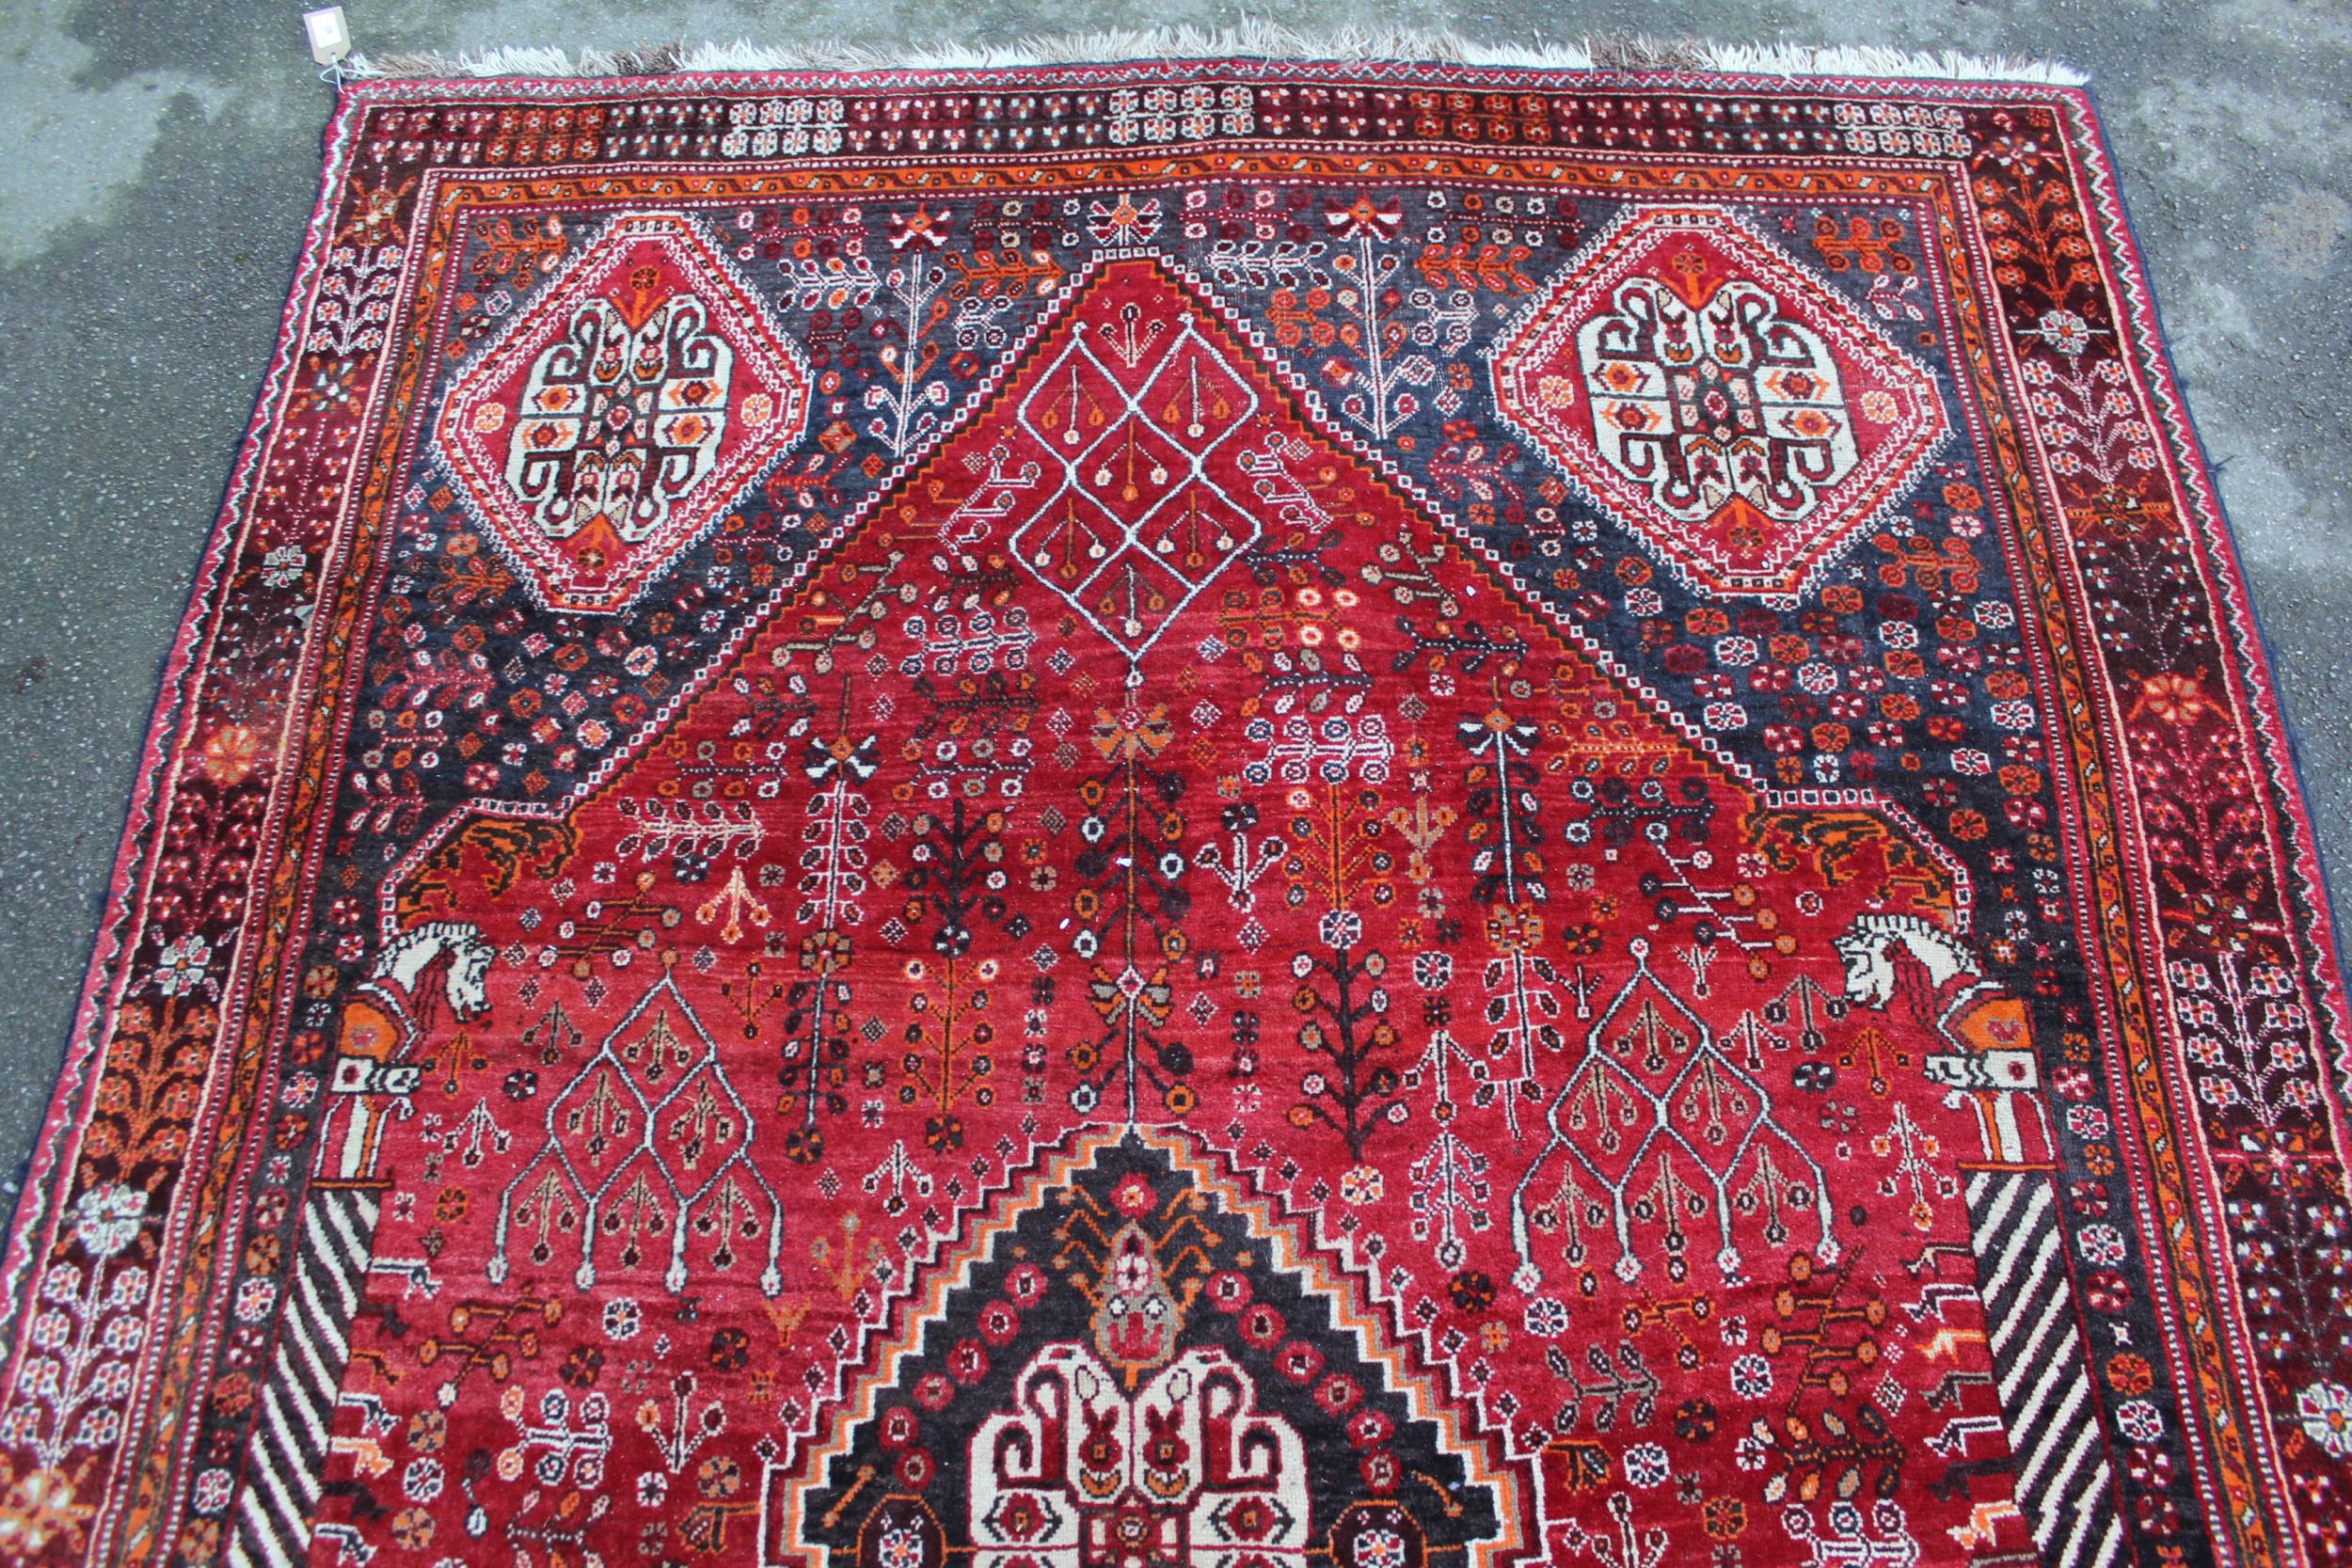 Qashqai rug with central medallion design on red and blue ground with borders, 96ins x 64ins Good - Image 2 of 4